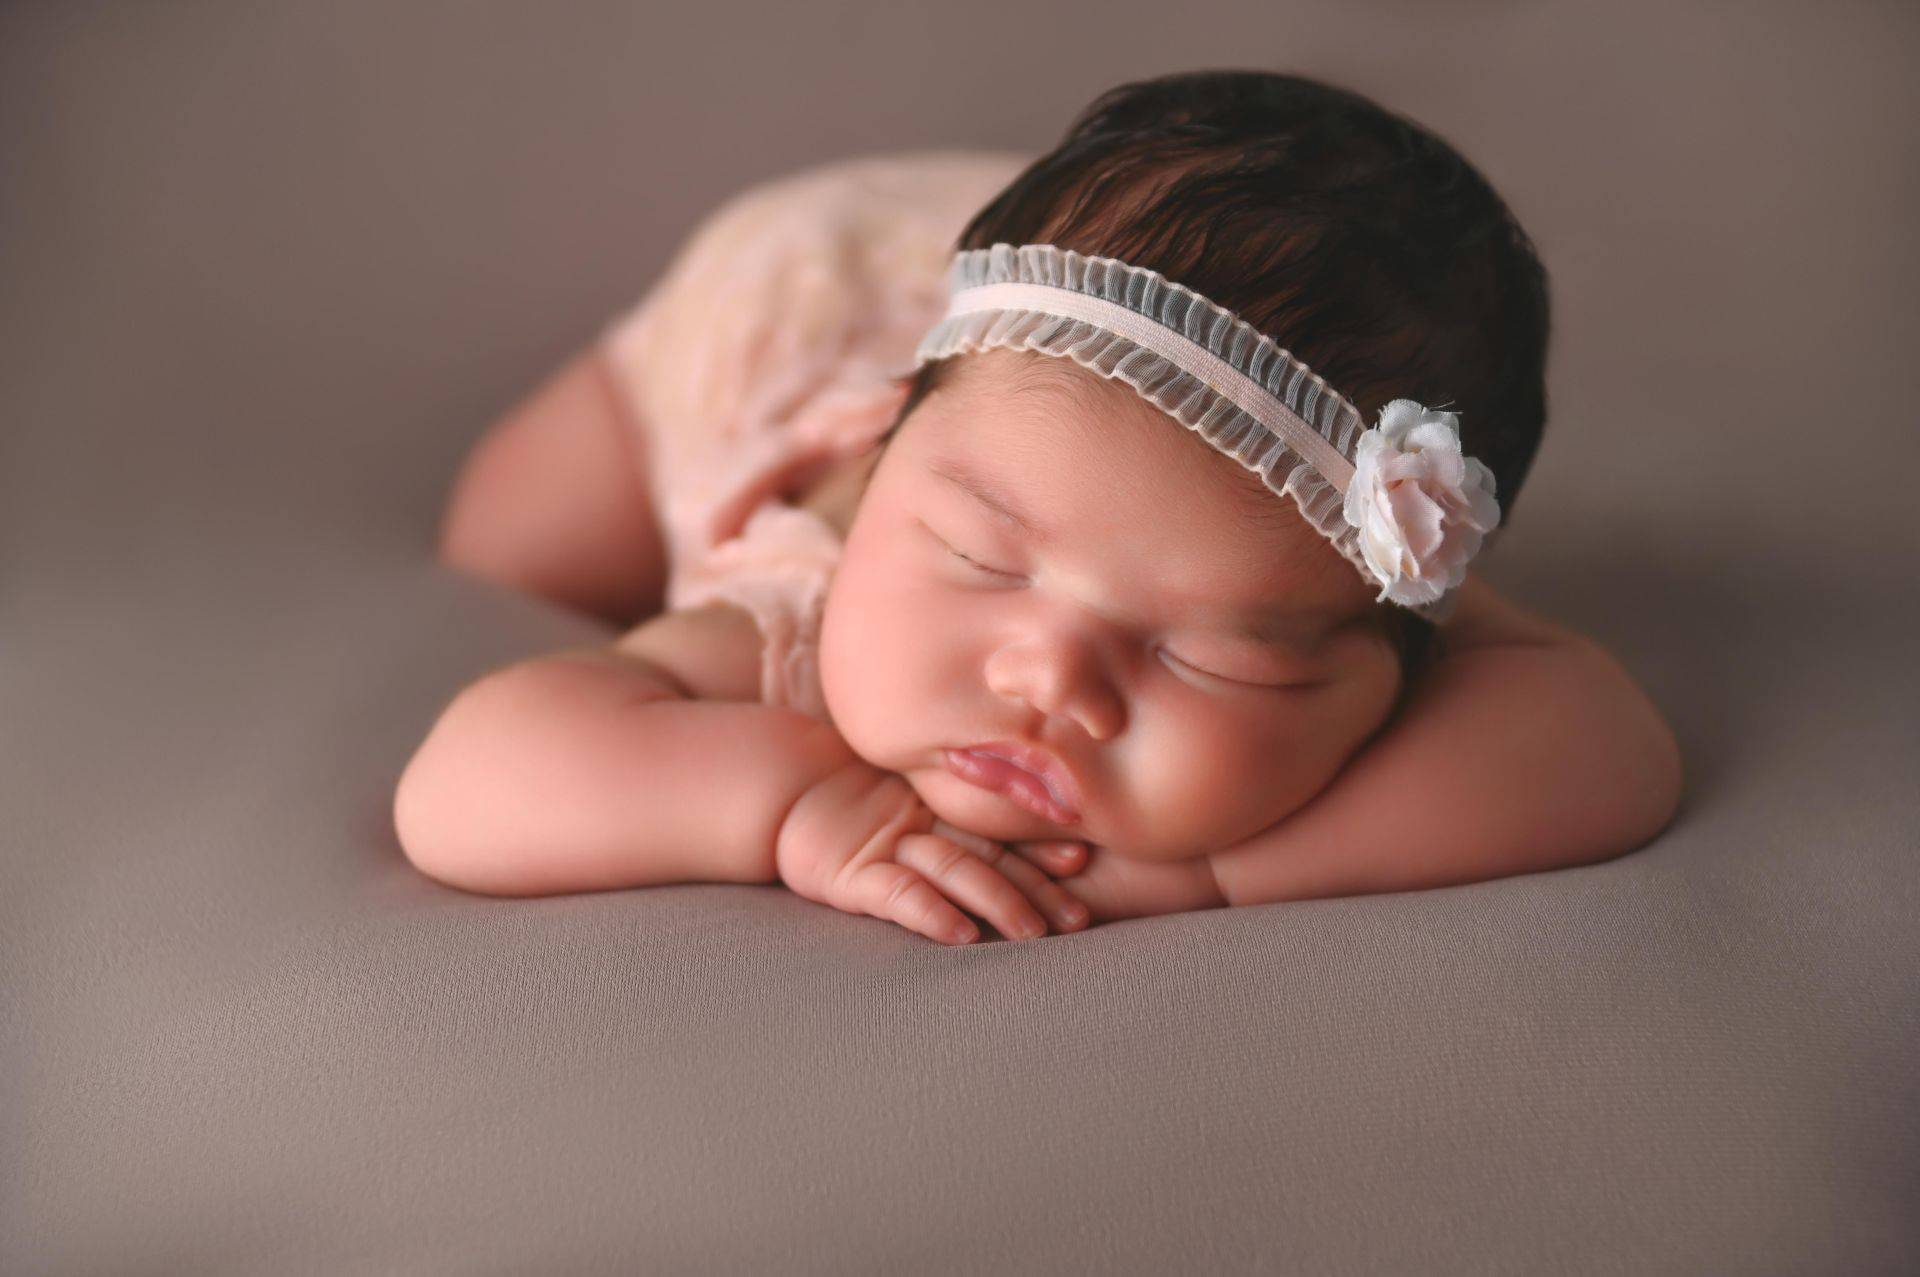 A baby girl is laying down on a gray background.